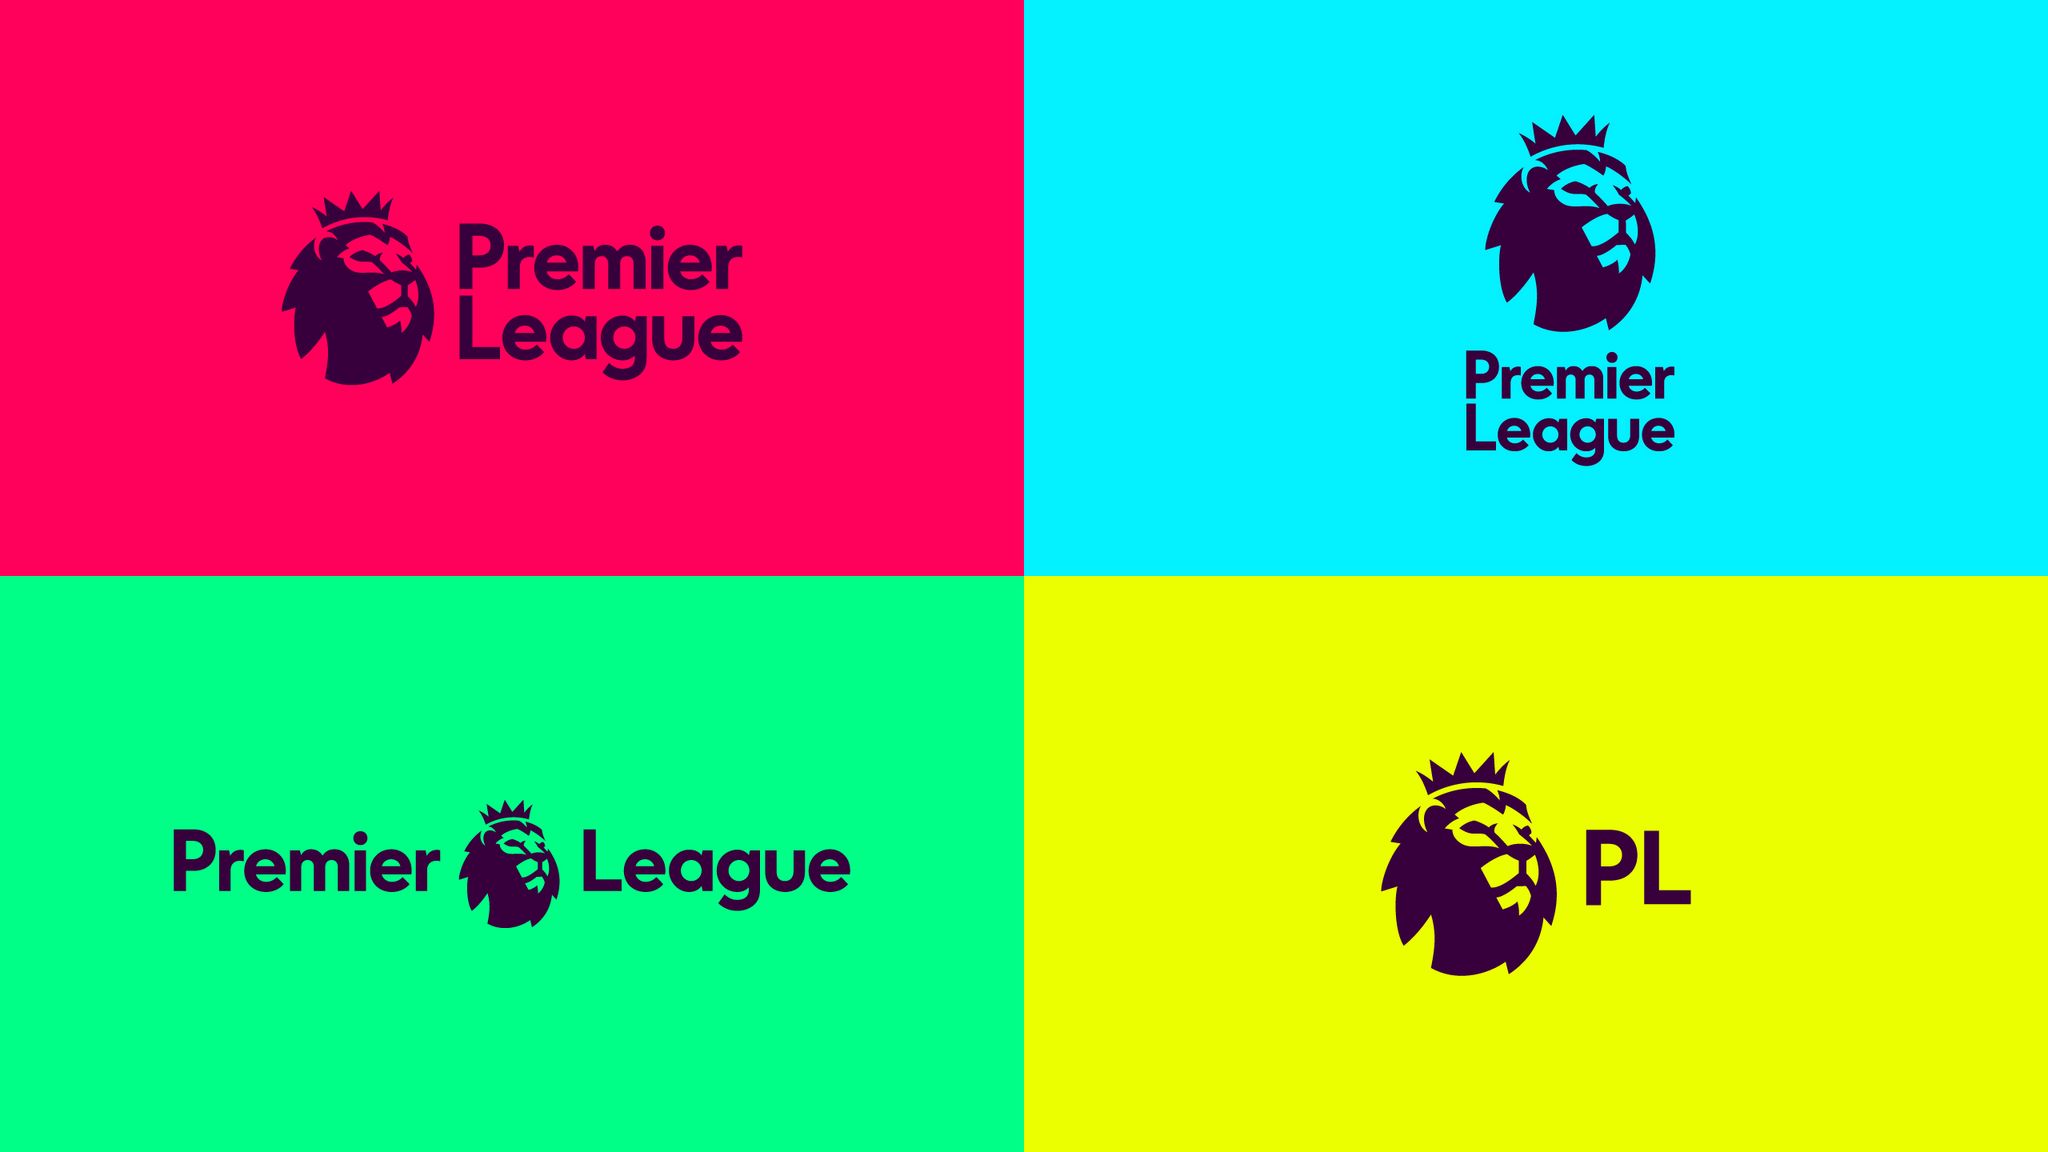 Come up with Ray As well Premier League reveals new logo to be used from 2016/17 season | Football  News | Sky Sports